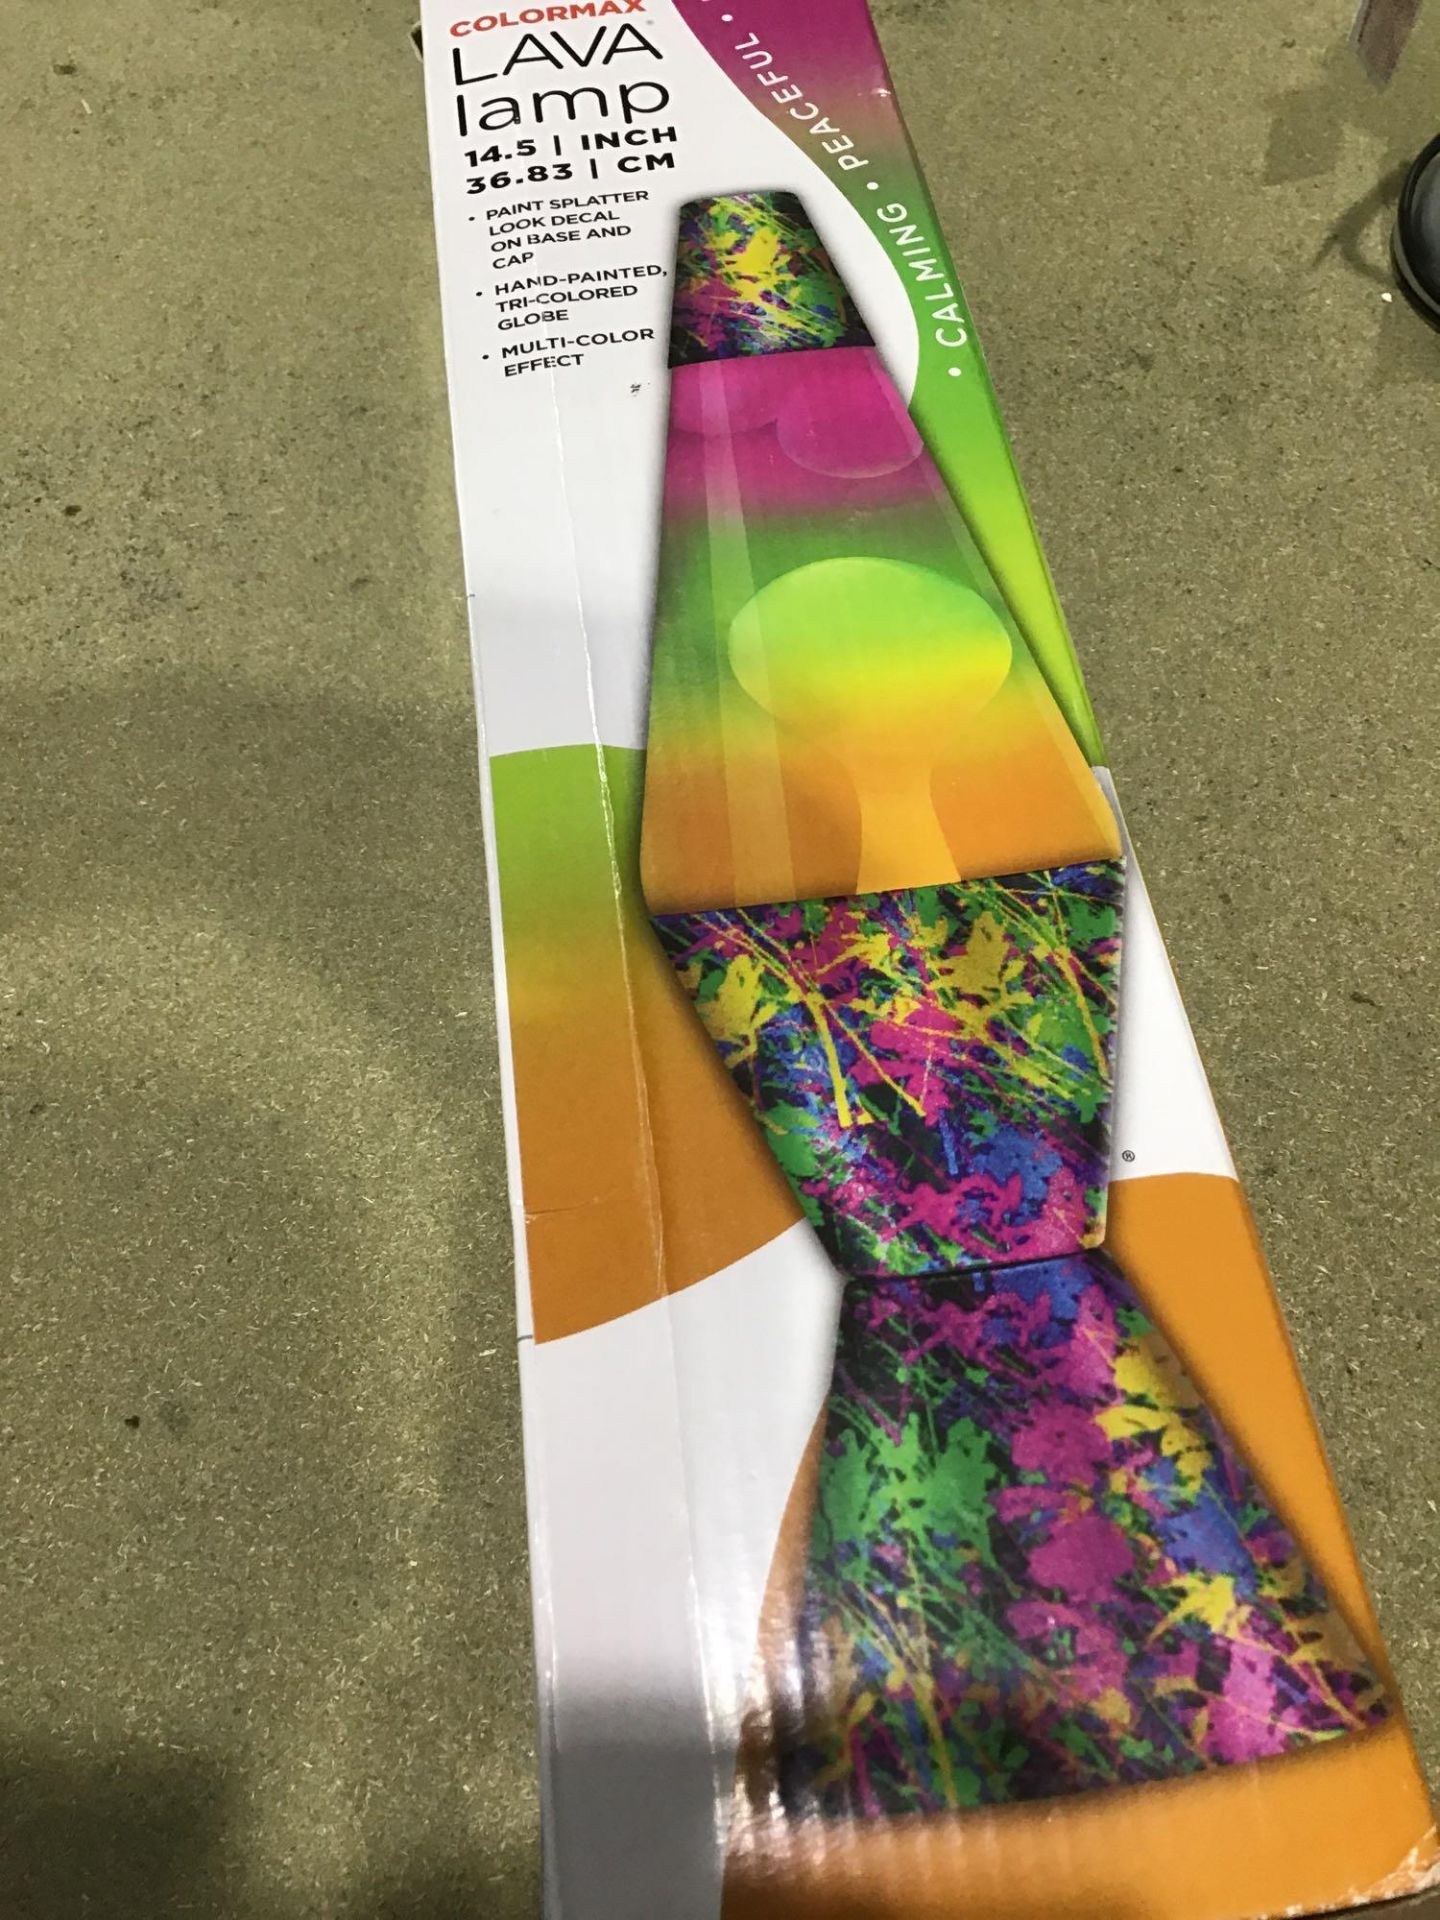 Schylling 14.5-Inch Colormax Lava Lamp with Rainbow Decal Base - Paintball - Image 2 of 4